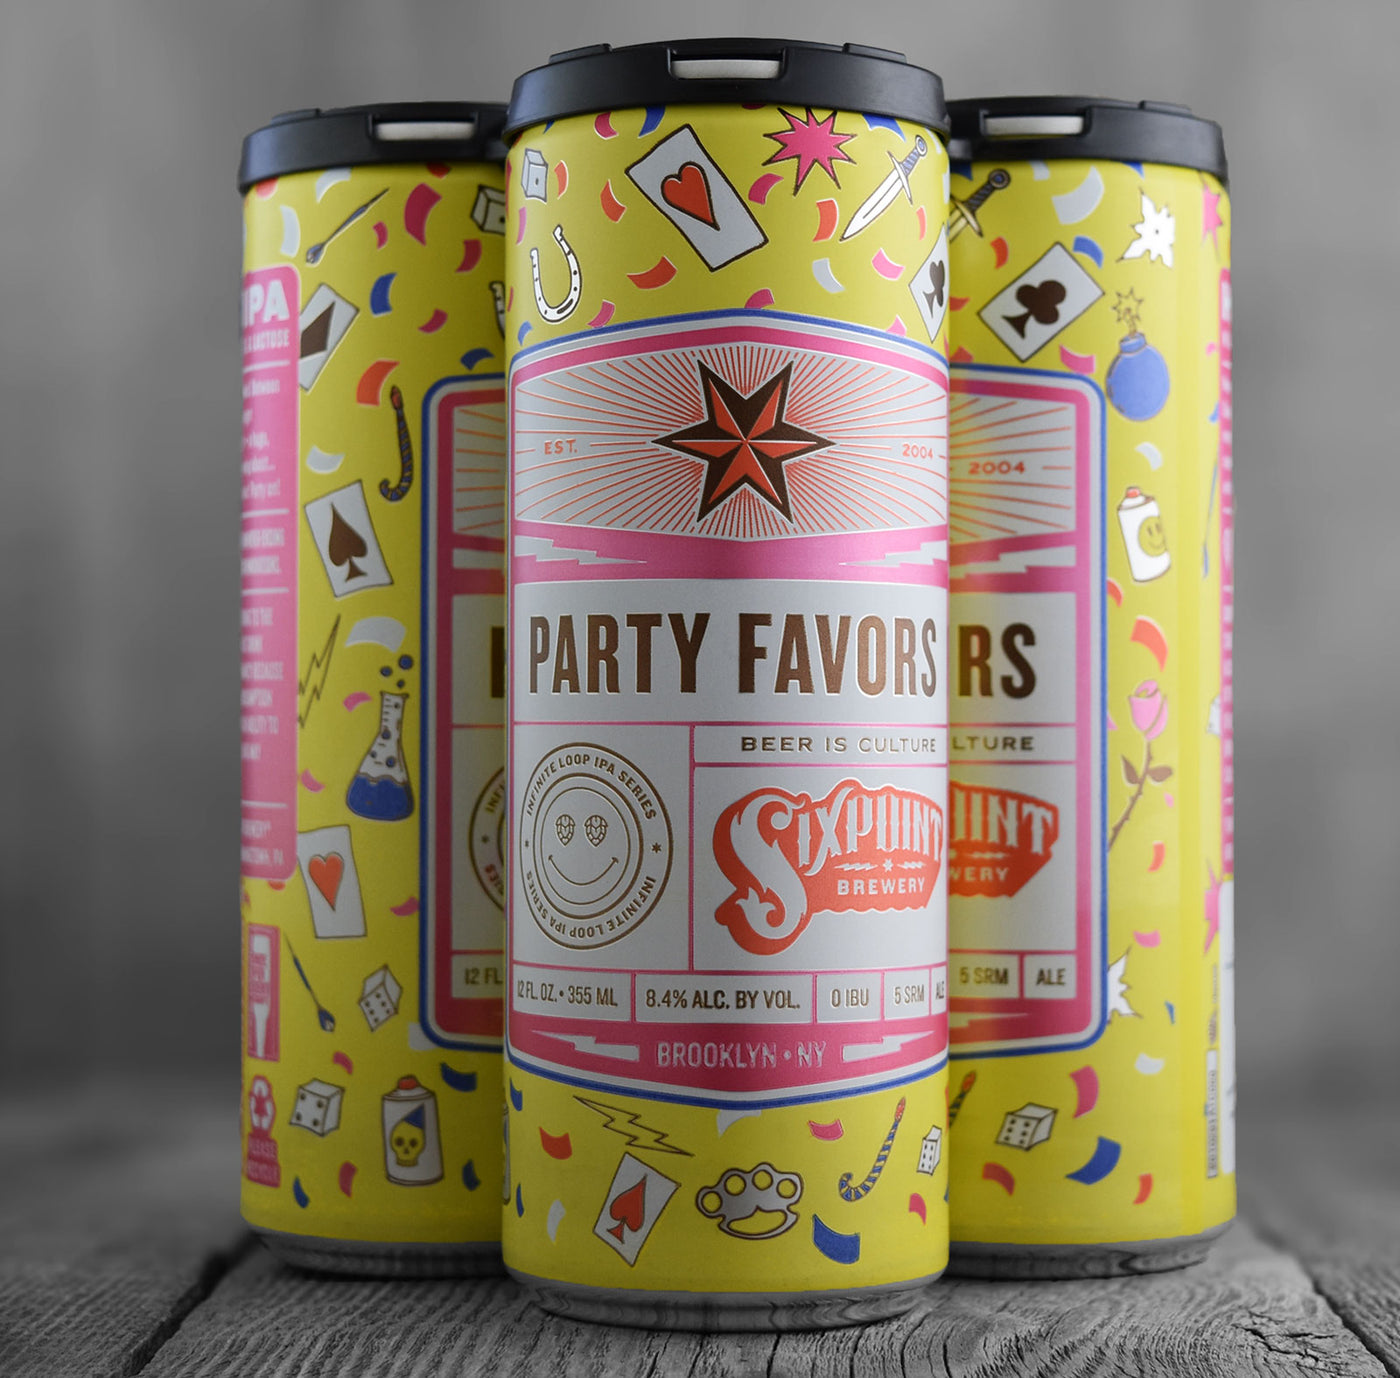 SixPoint Brewery Party Favors Hazy IIPA